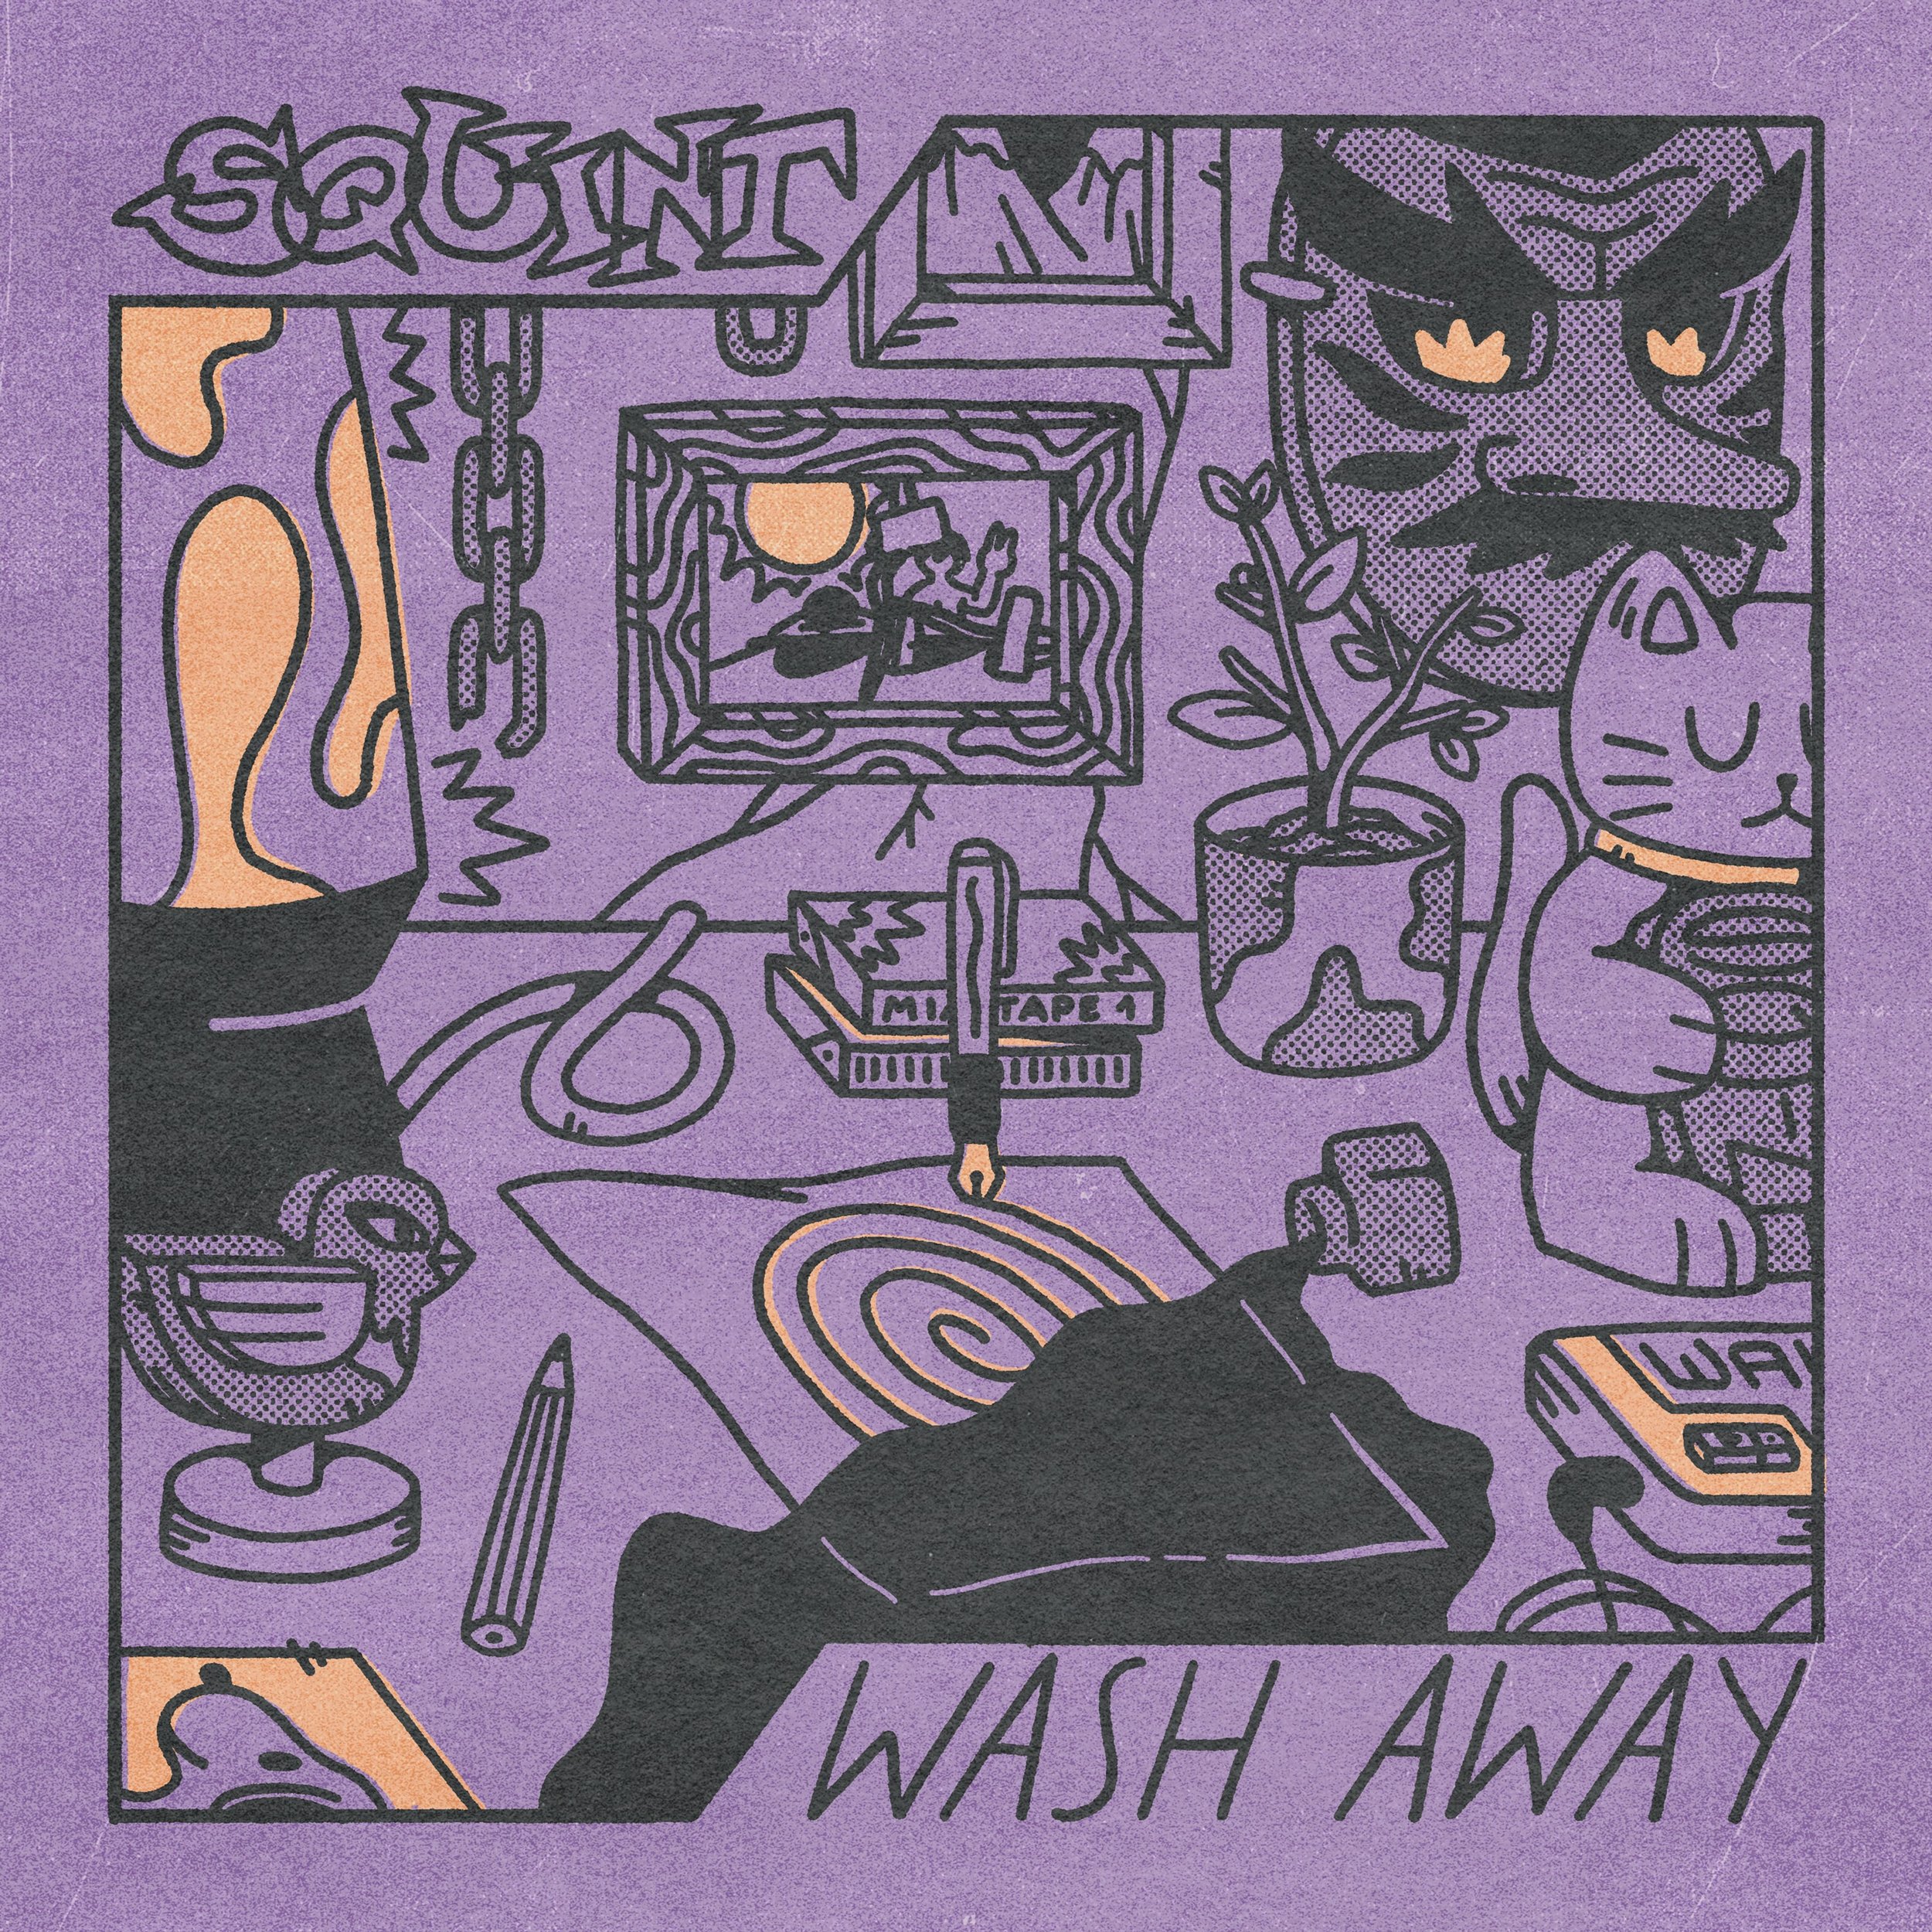 Squint - Wash Away - Cover.jpg